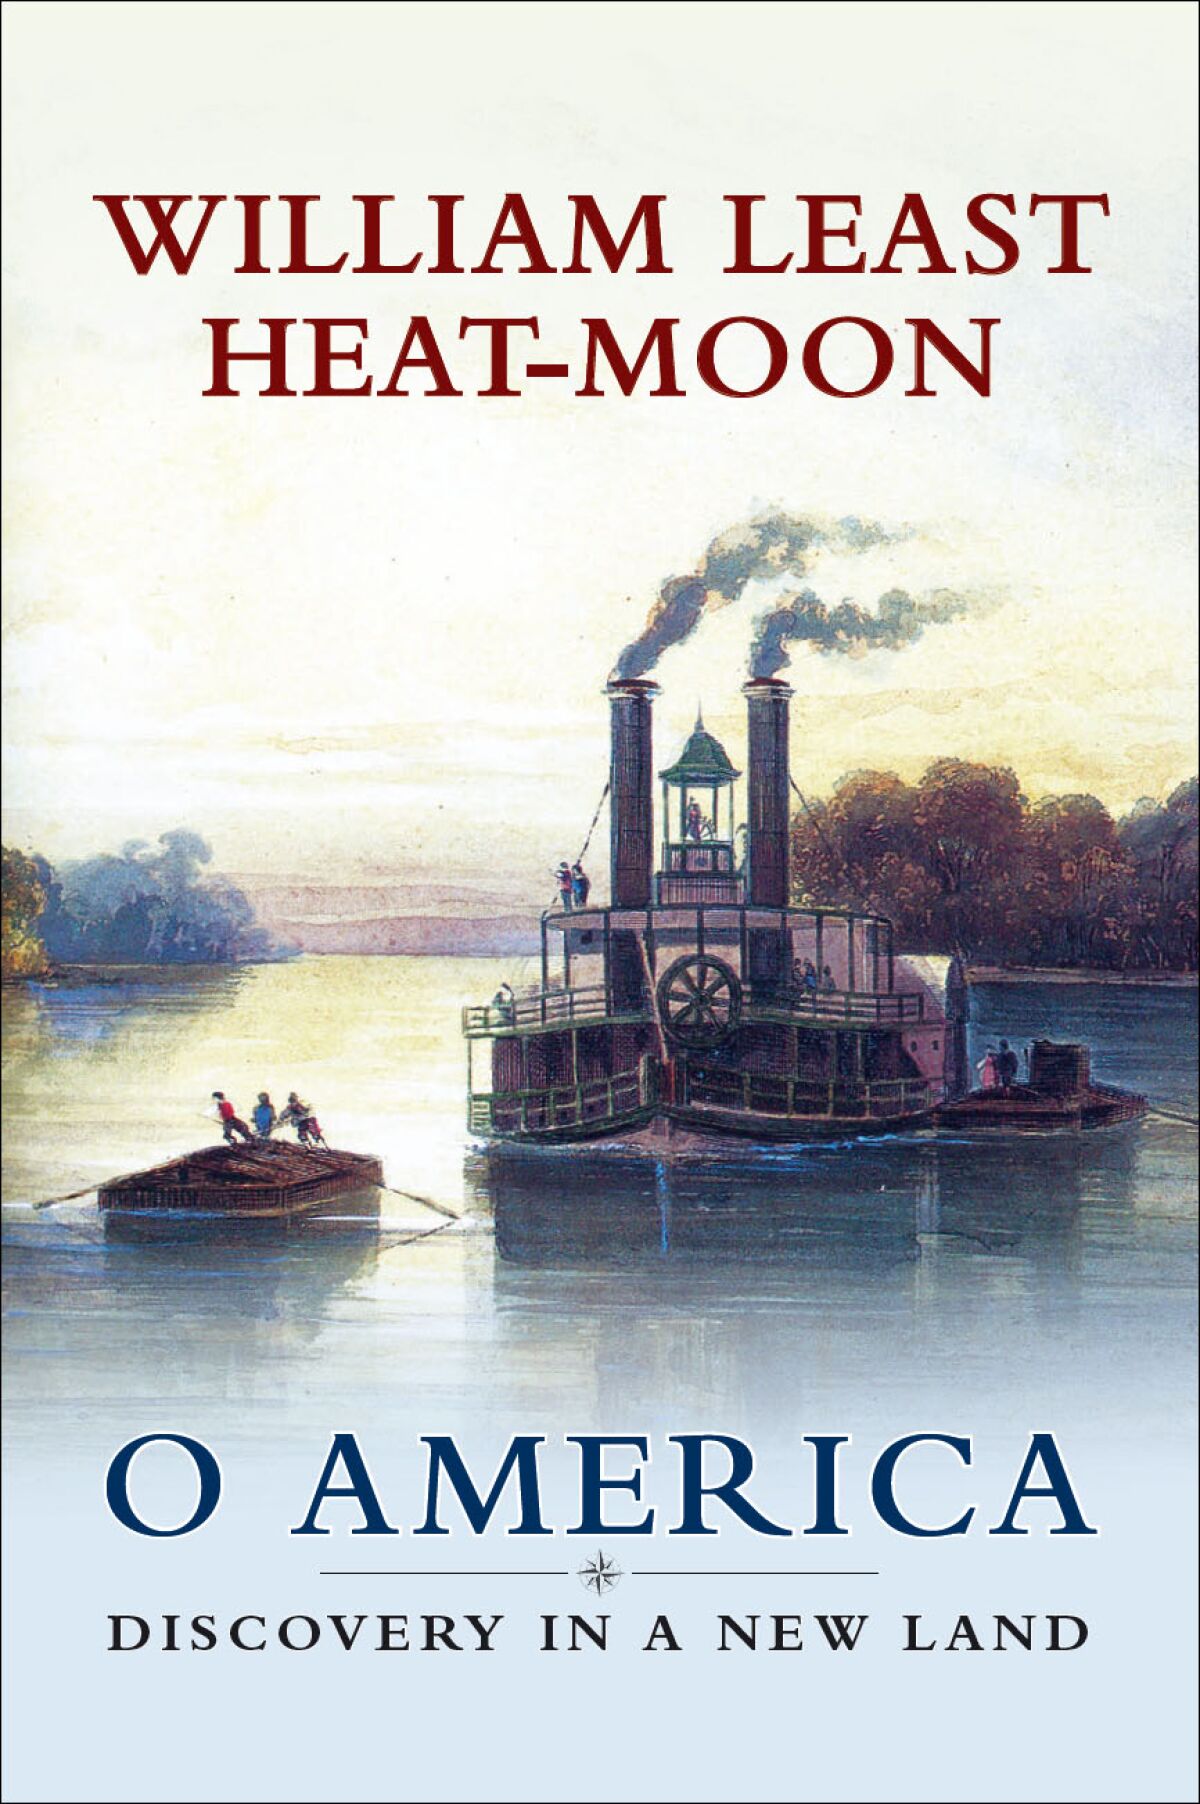 Book jacket of "O America" by William Least Heat-Moon.